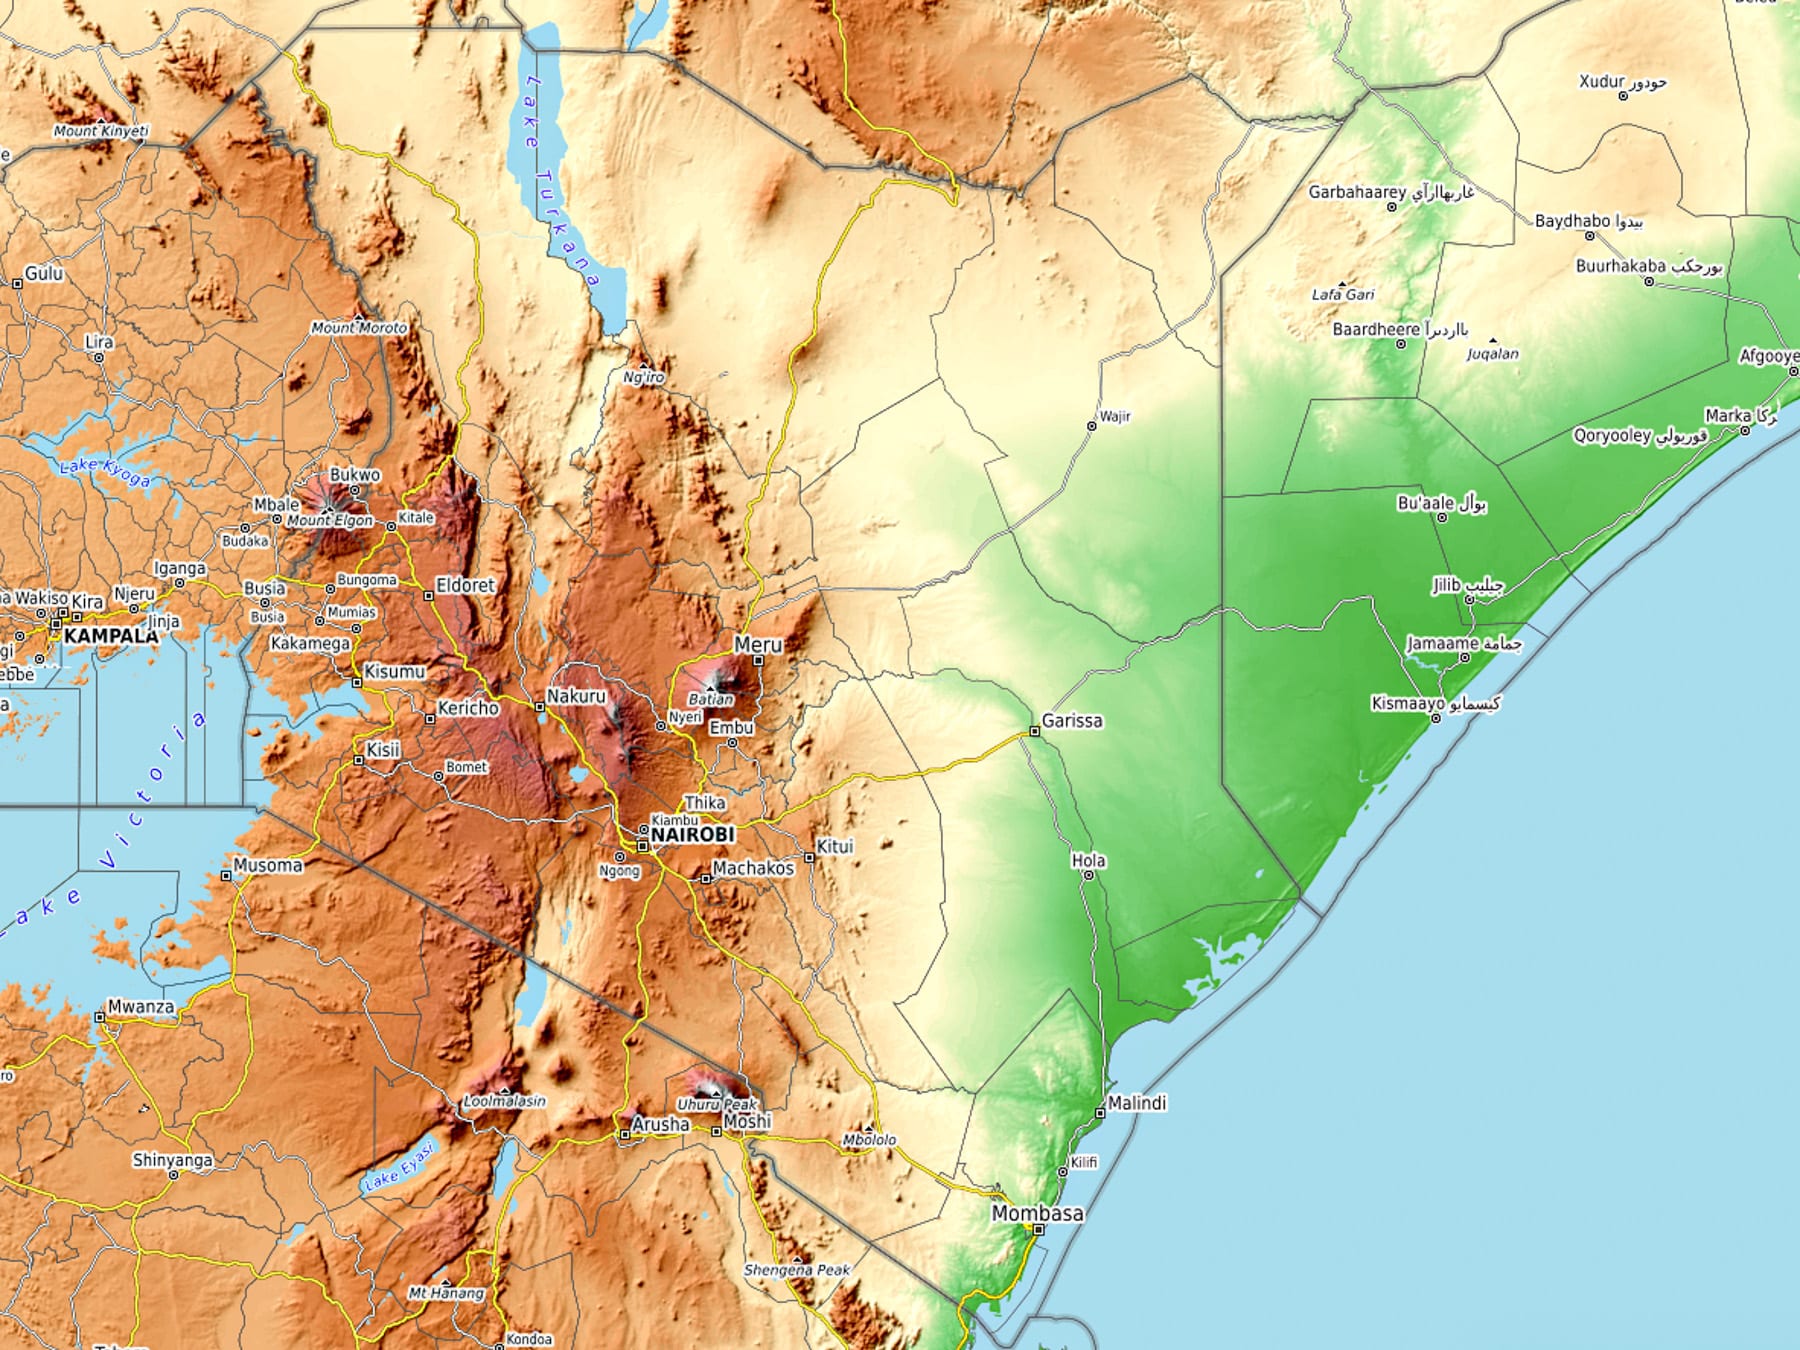 The topology of Kenya has an impact on climate and temperatures.